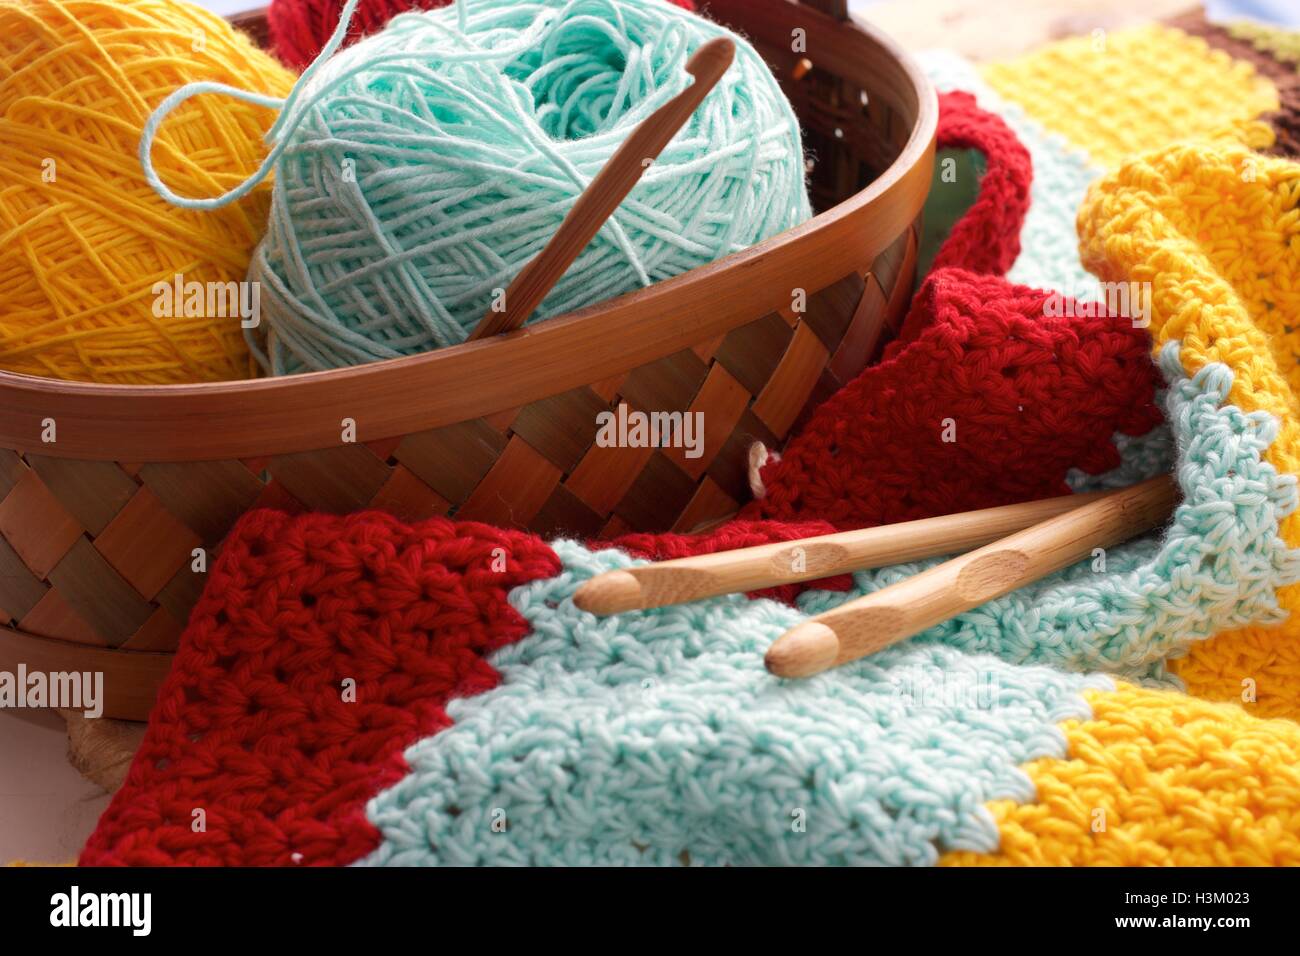 Balls of White and Blue Yarn in a Basket with Knitting Needles Stock Image  - Image of cotton, balls: 206473341